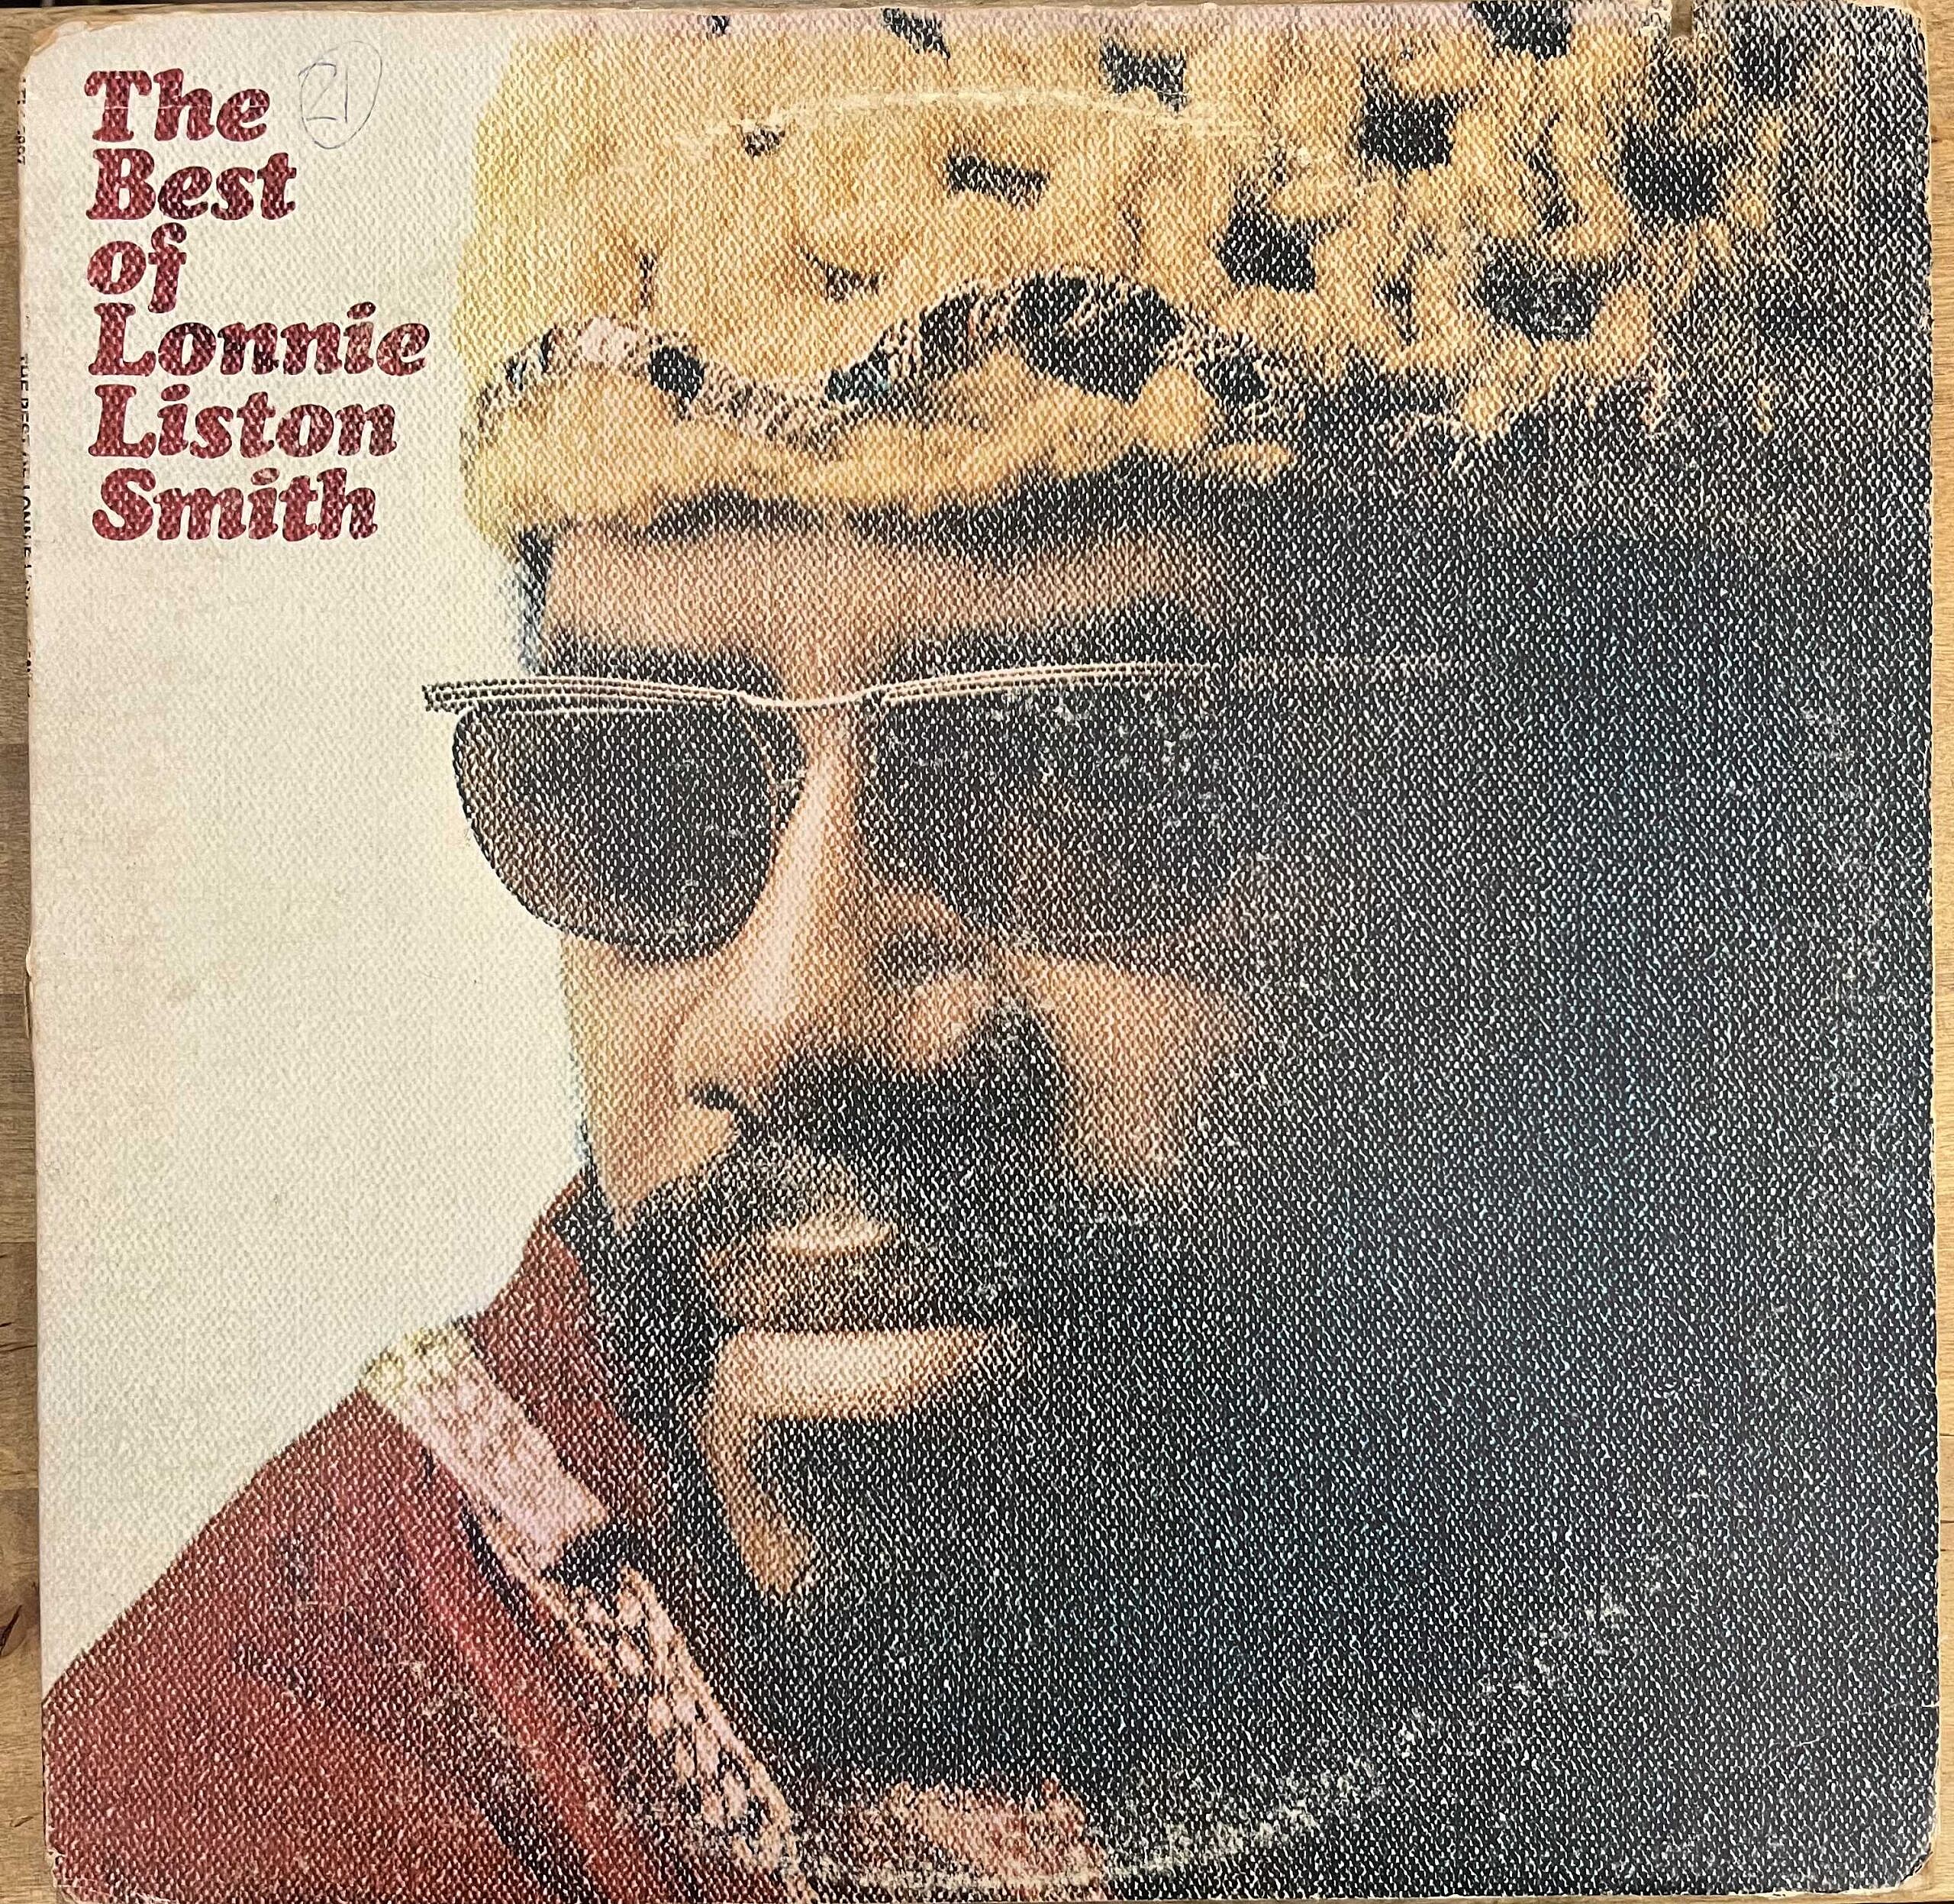 The Best Of Lonnie Liston Smith